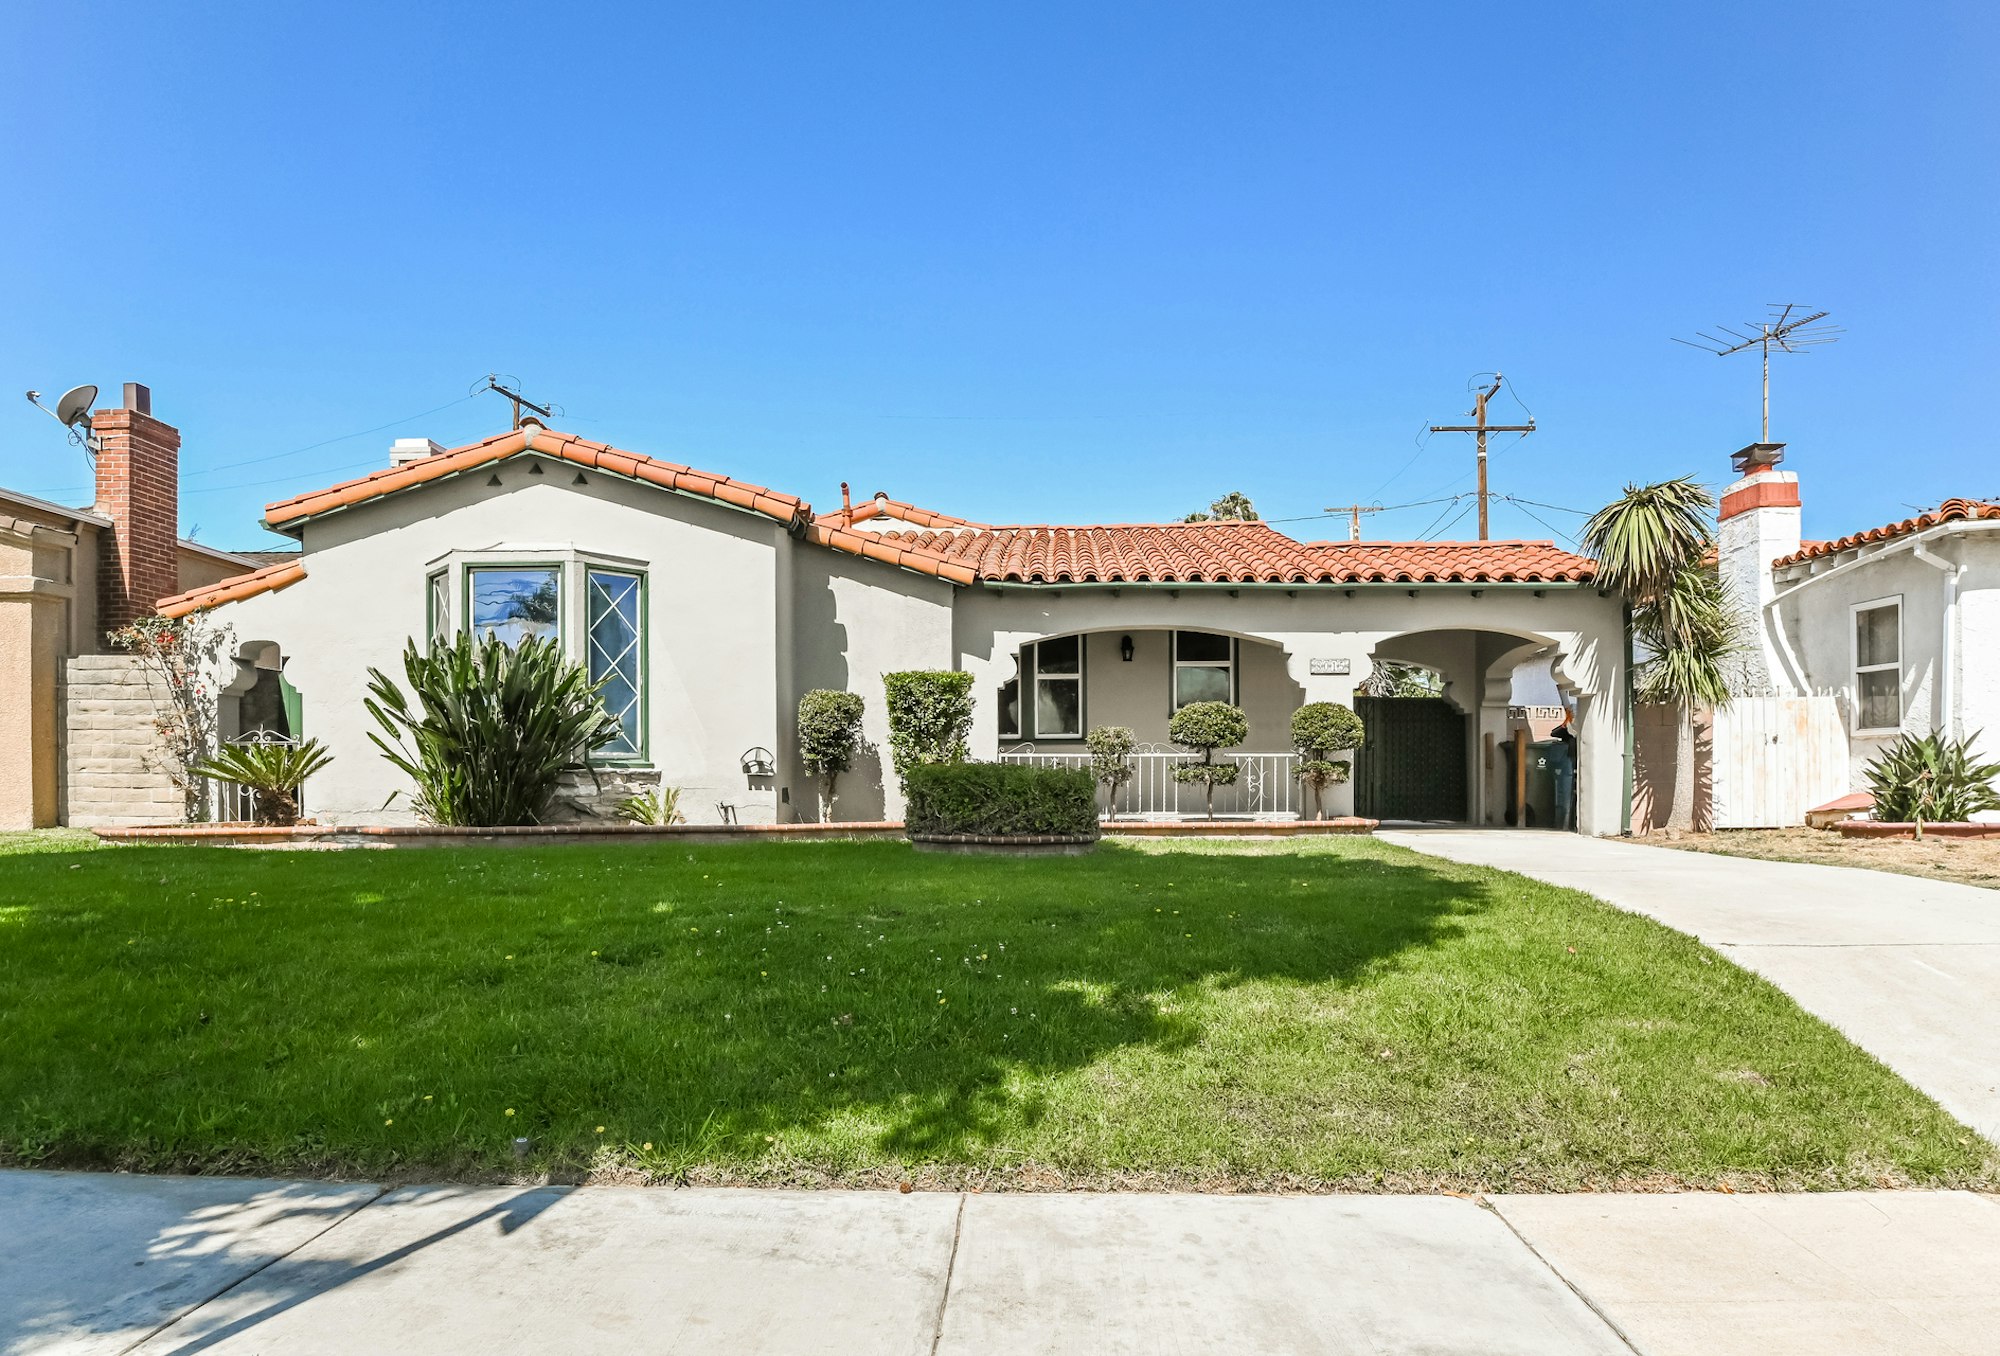 Photo 1 of 27 - 8015 S 8th Ave, Inglewood, CA 90305